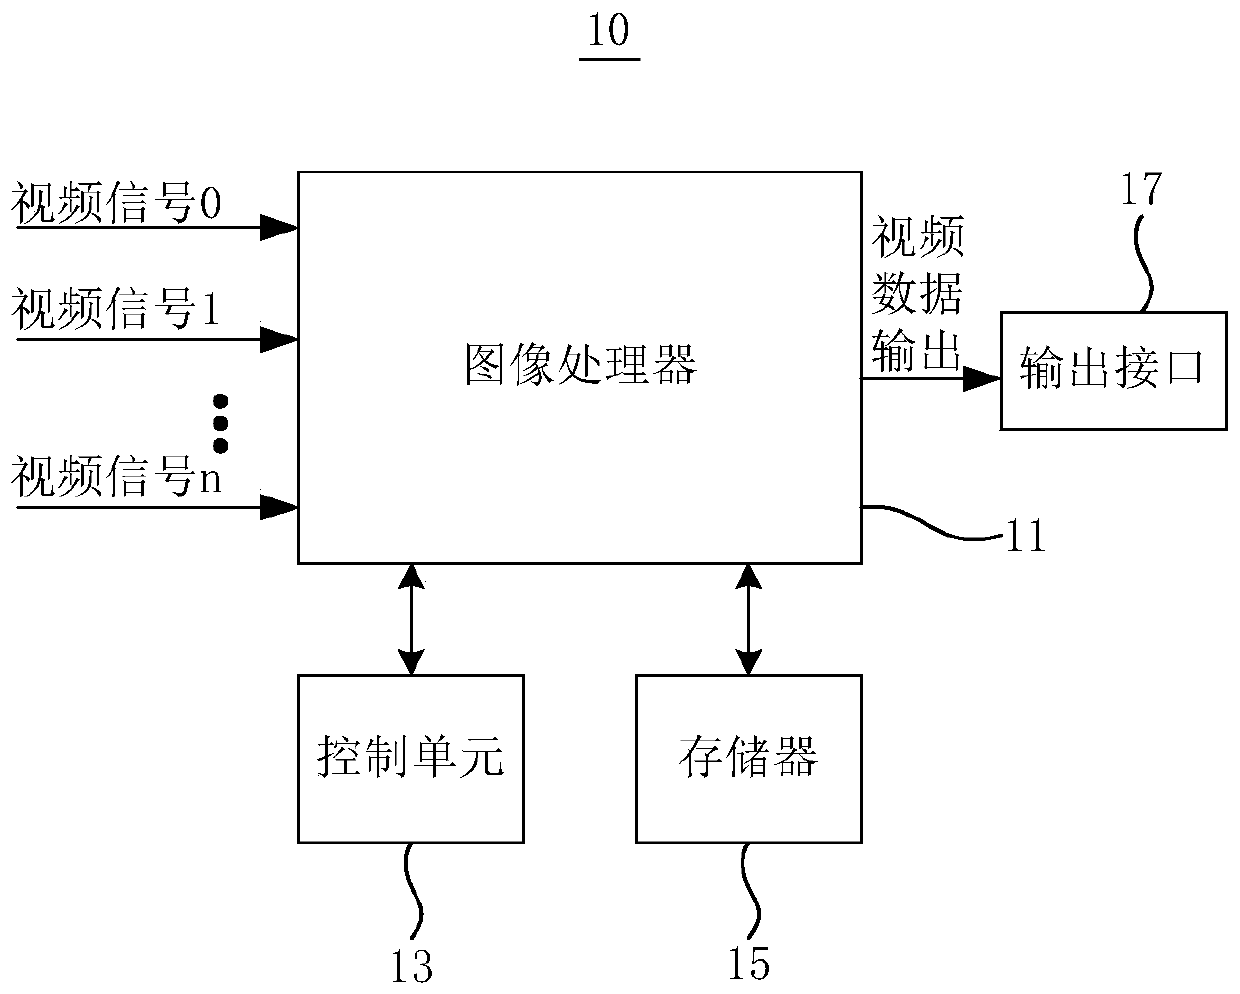 Video processing device and multi-window screen display method